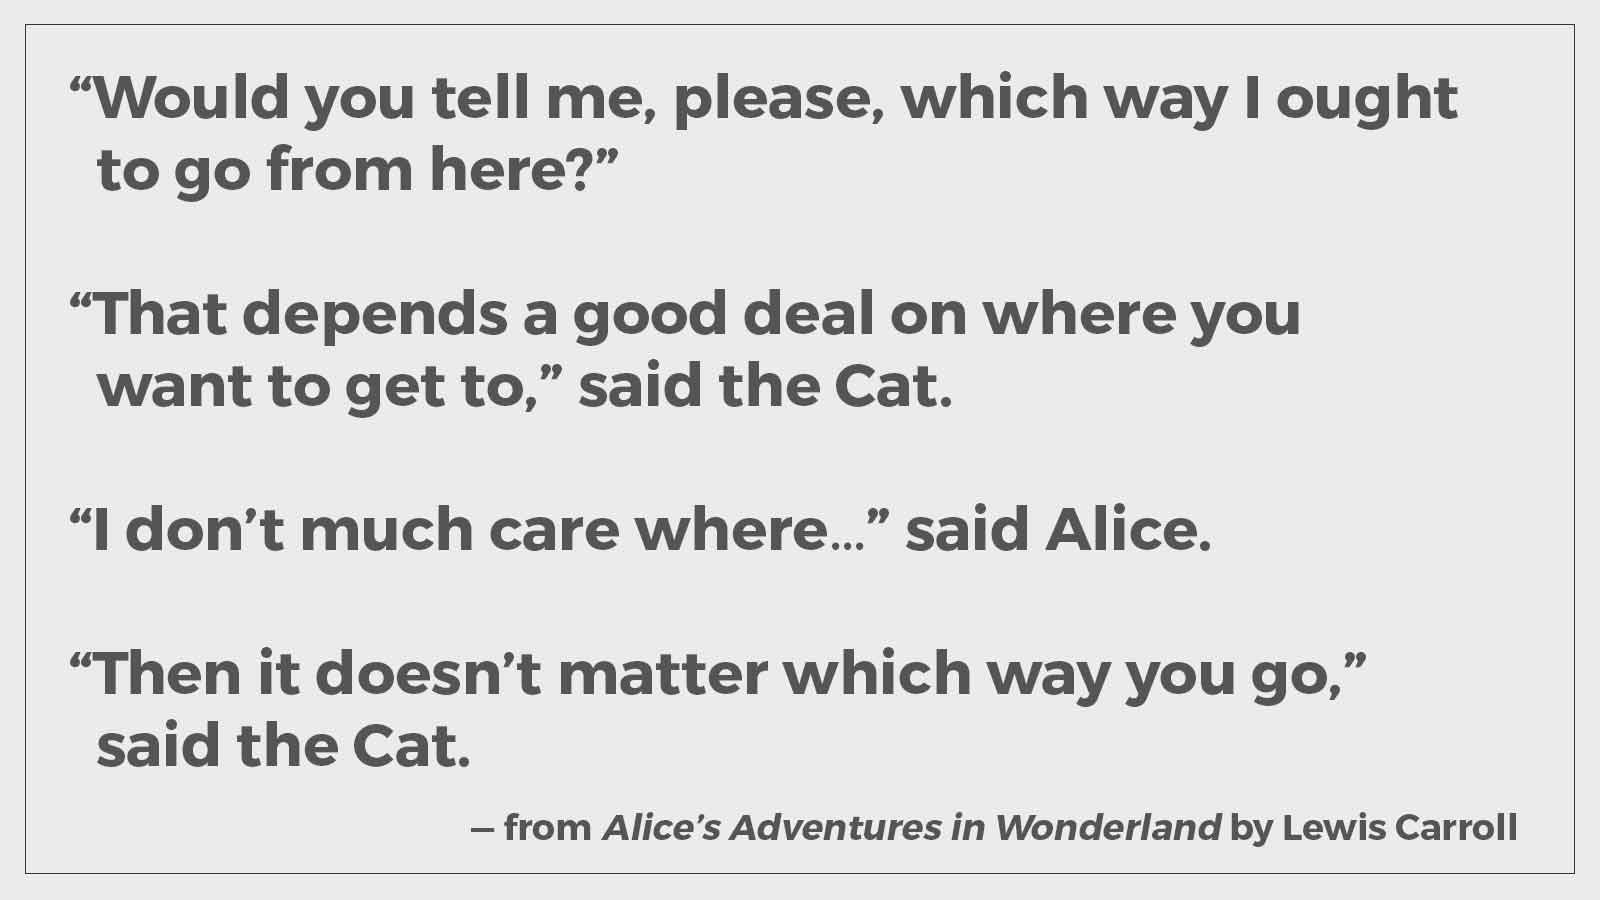 "Would you tell me, please, which way I ought to go from here?" "That depends a good deal on where you want to get to," said the Cat. "I don't much care where—" said Alice. "Then it doesn't matter which way you go," said the Cat.